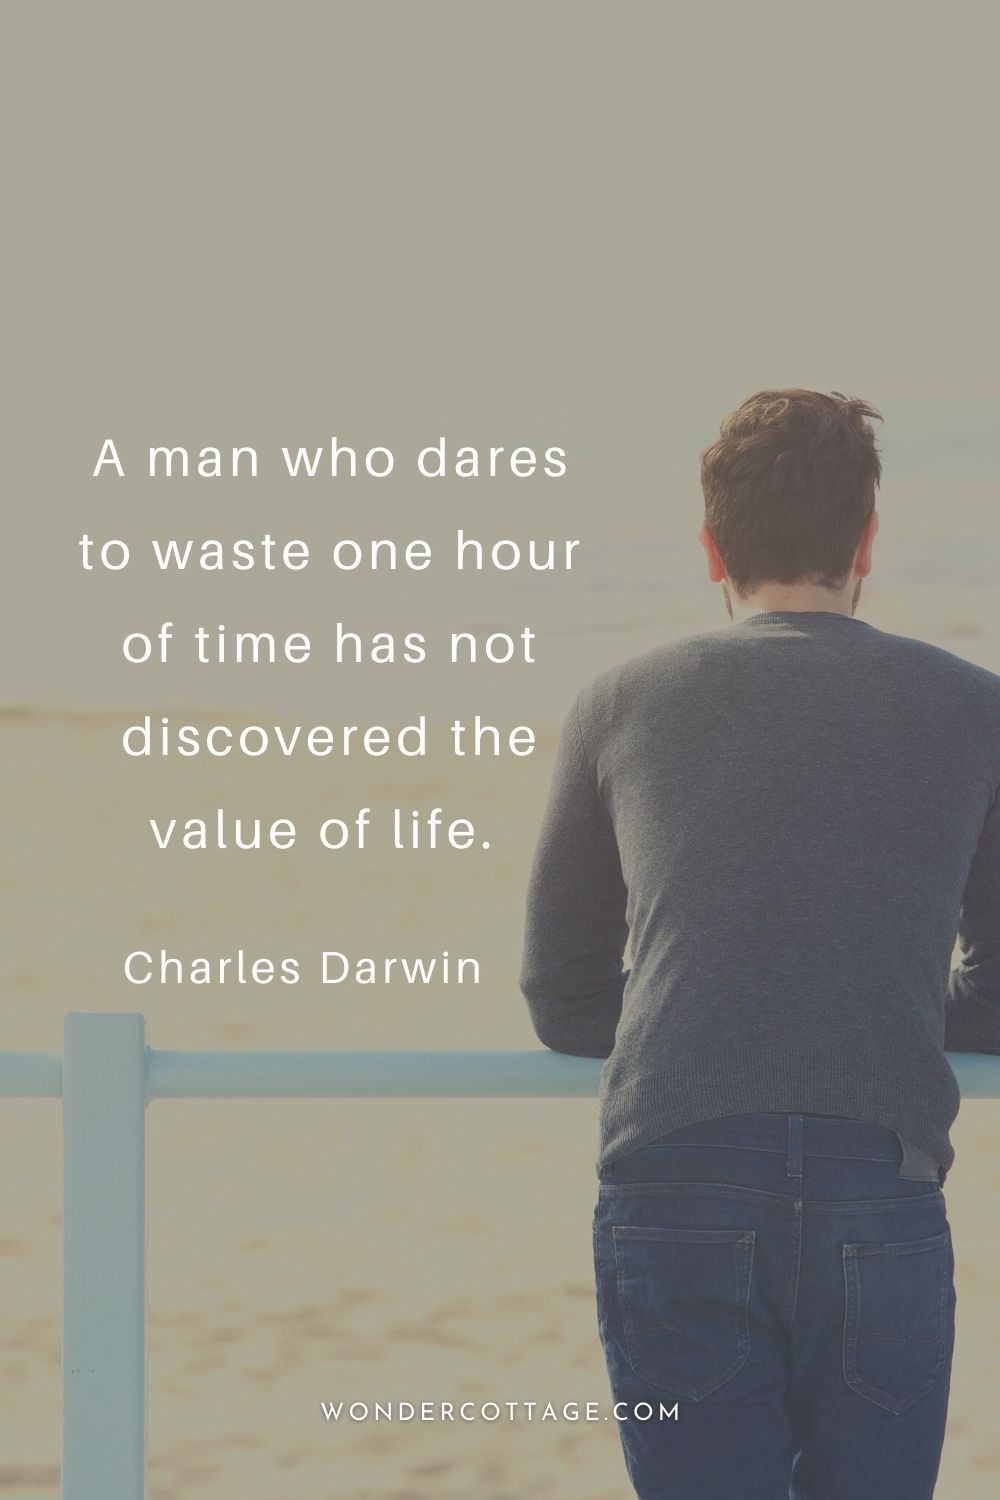 A man who dares to waste one hour of time has not discovered the value of life.  Charles Darwin